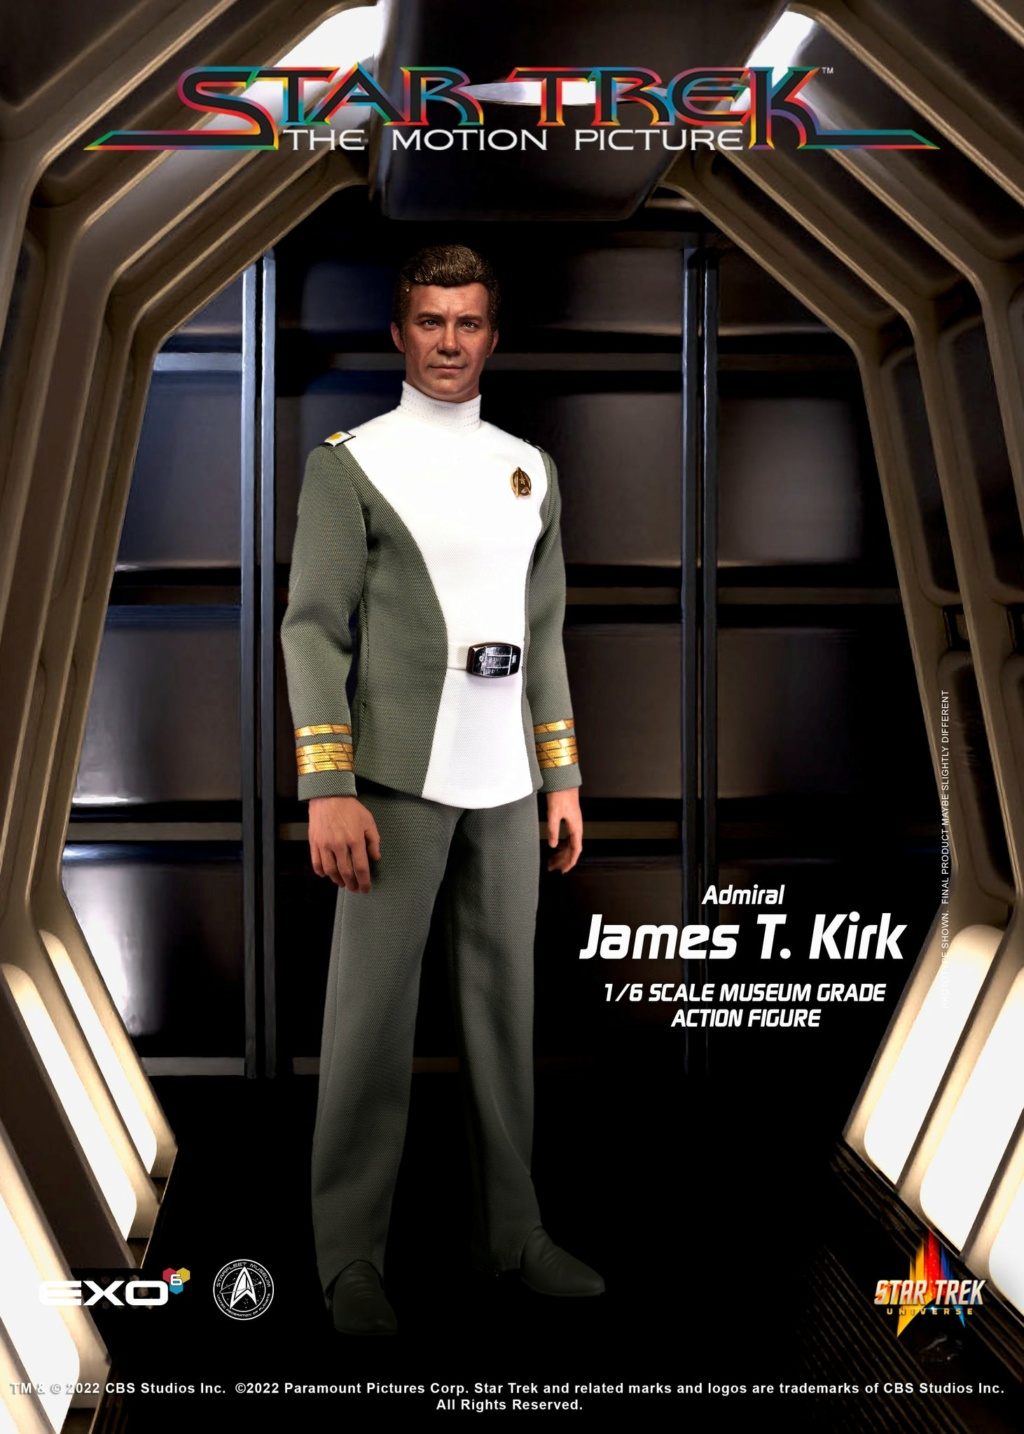 Exo-6 - NEW PRODUCT: EXO-6: STAR TREK: THE MOTION PICTURE: ADMIRAL JAMES T. KIRK 1/6 scale figure (LIMITED & IMMEDIATE AVAILABILITY RELEASE) 5679